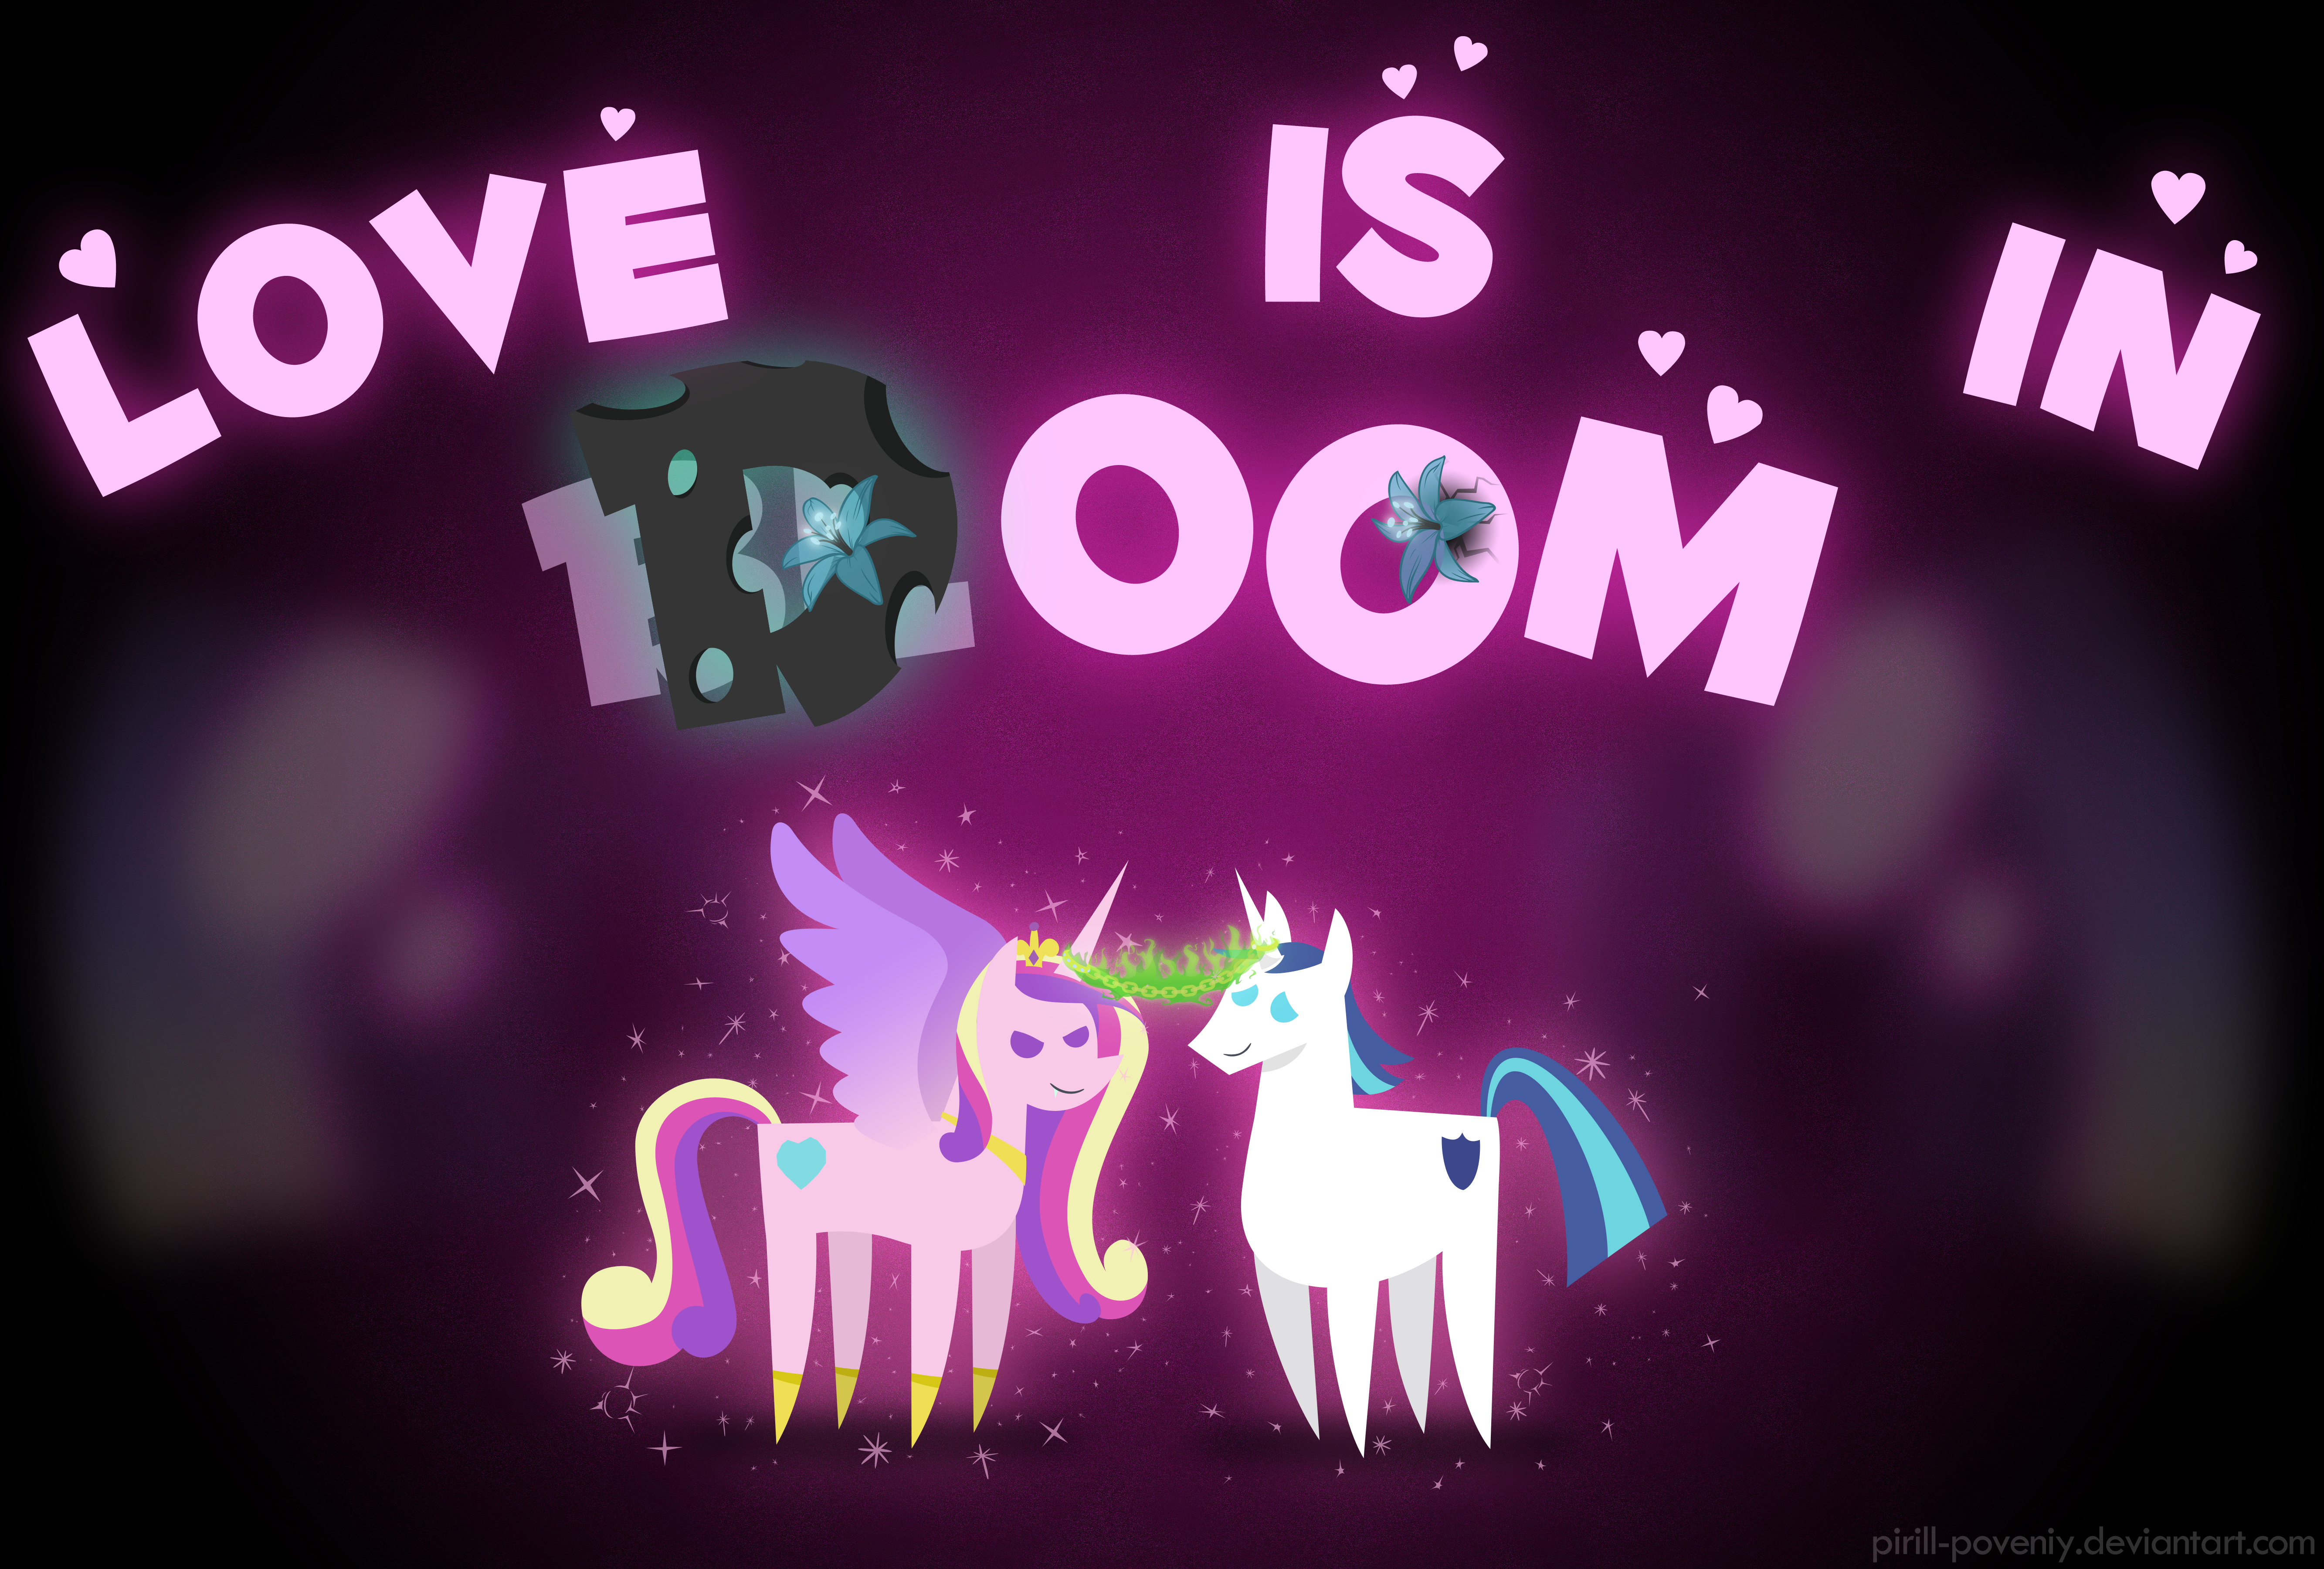 Love is in Bloom by Pirill-Poveniy